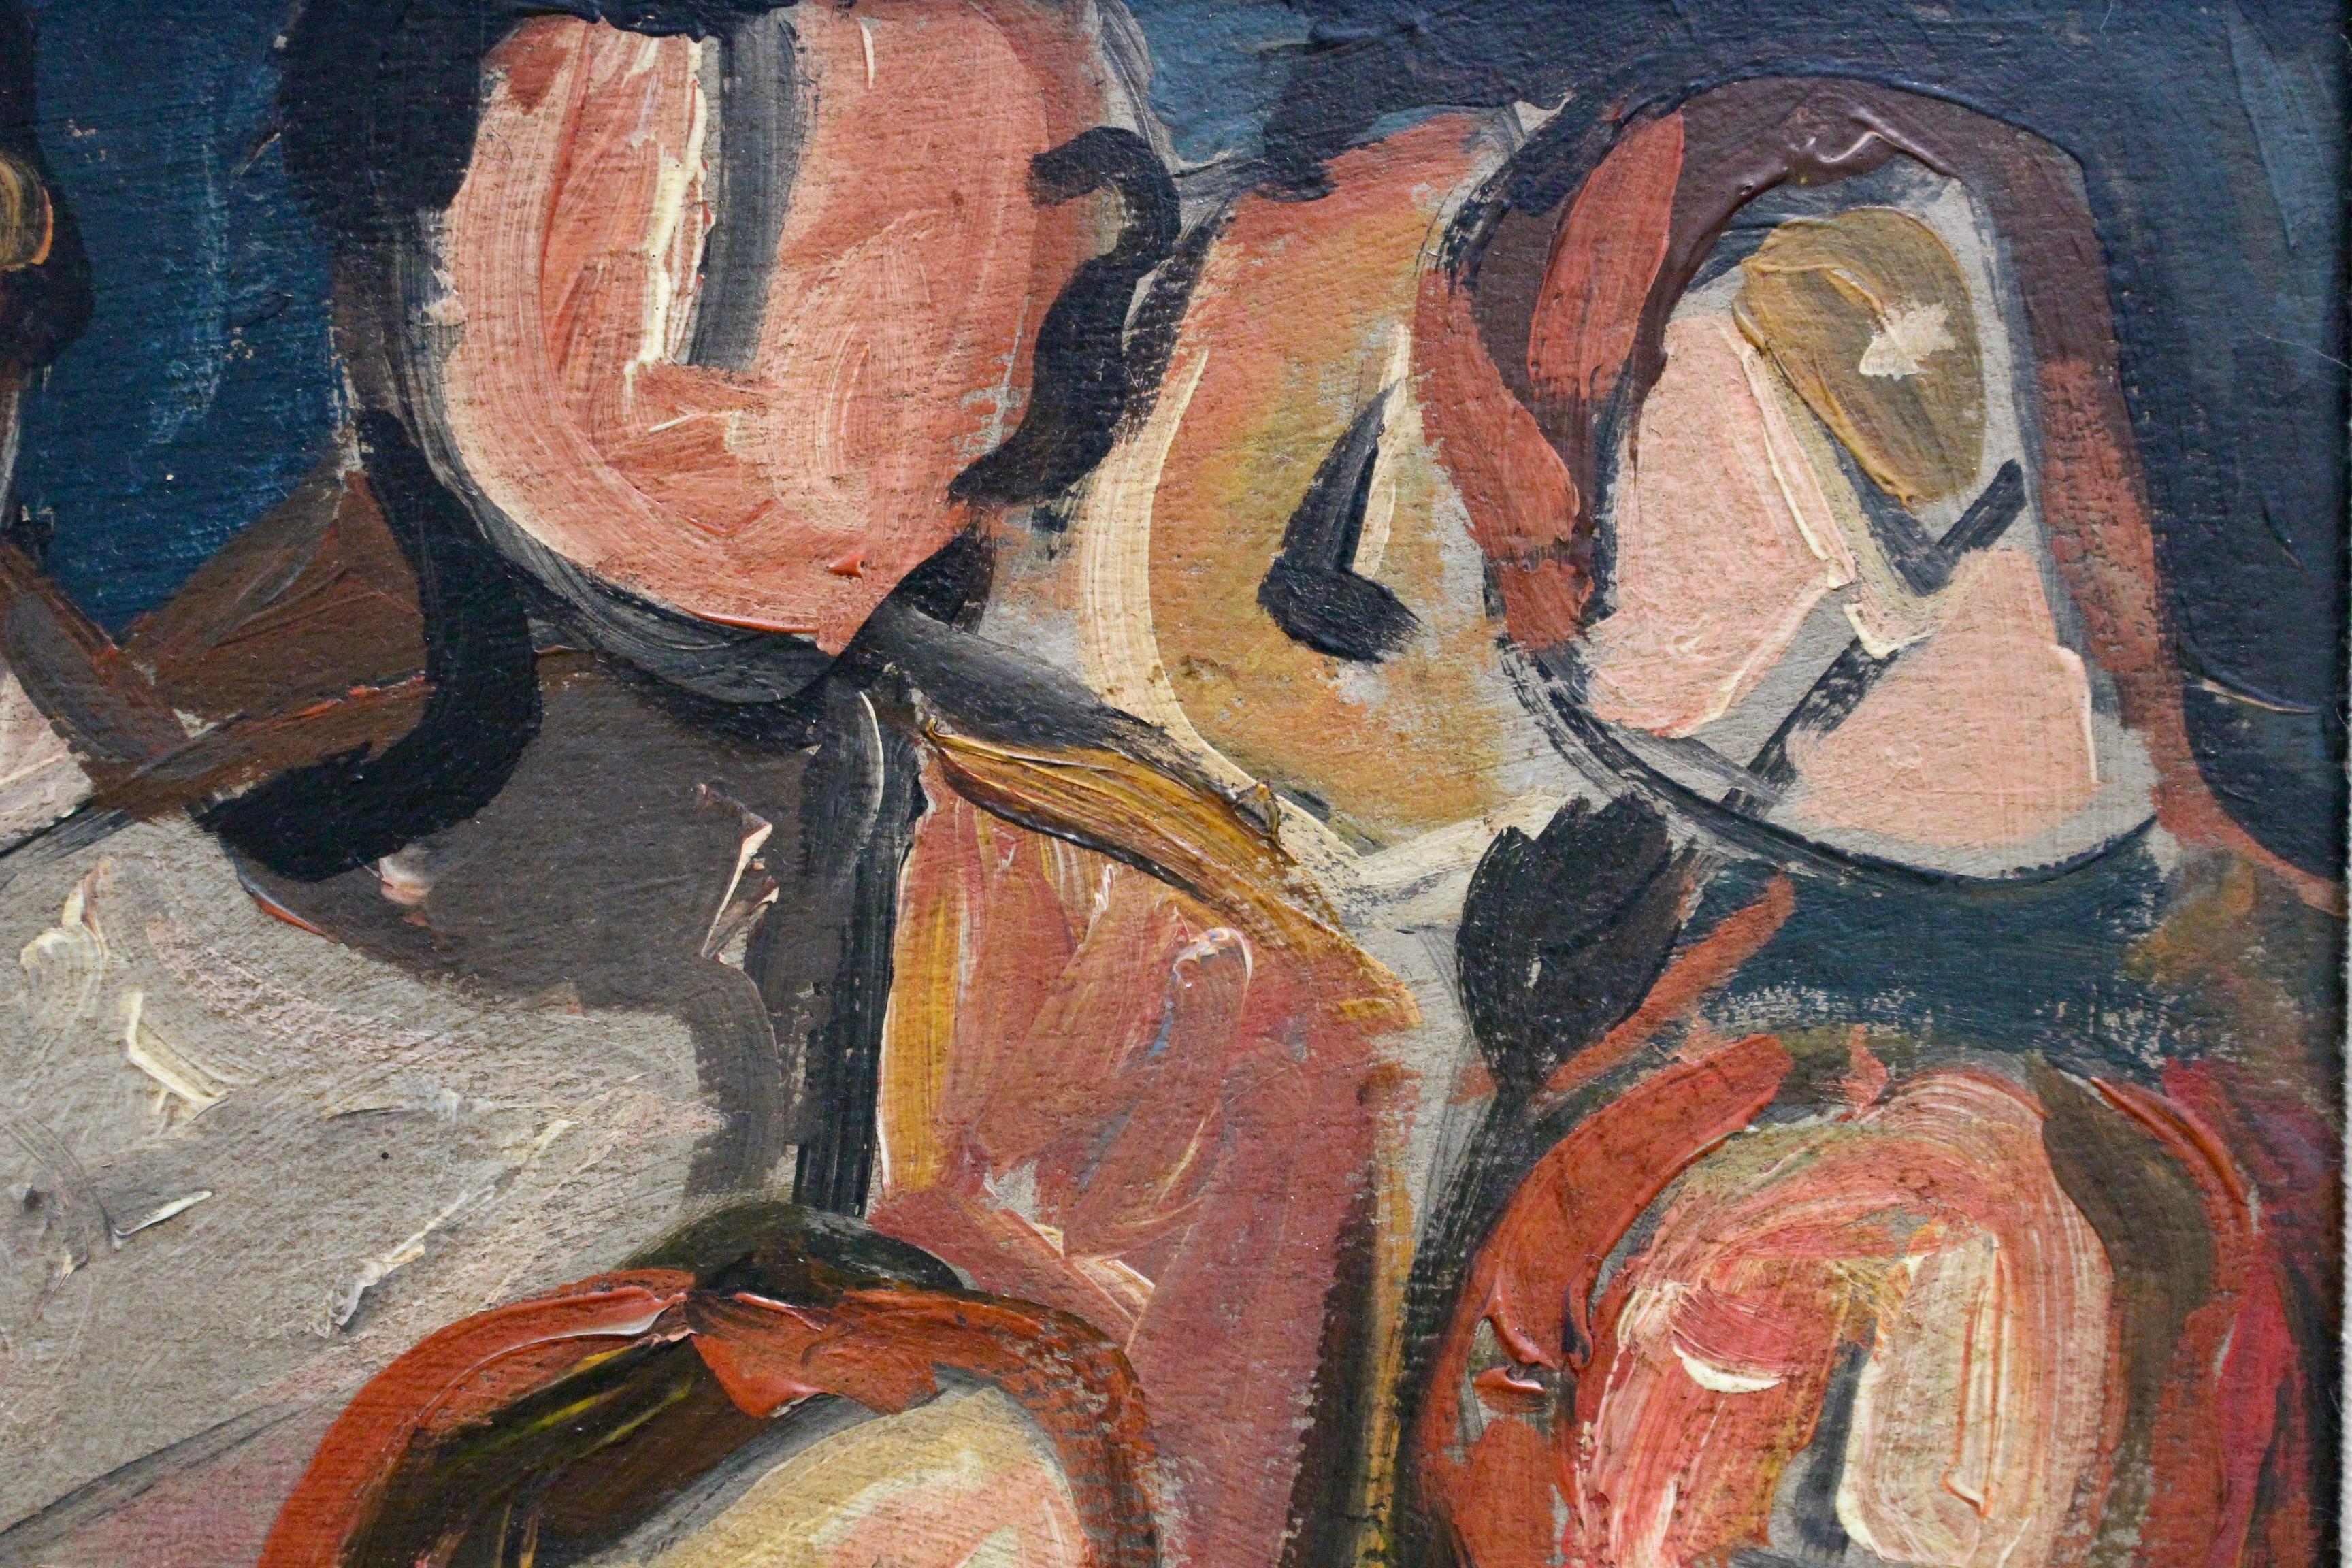 'The Gathering', oil on board, Berlin School, Initialed 'TZ' (circa 1960s - 70s). A gathering of friends clearly having a wonderful time are enjoying each other's company. Although the faces are anonymous and without detail, it is evident they are